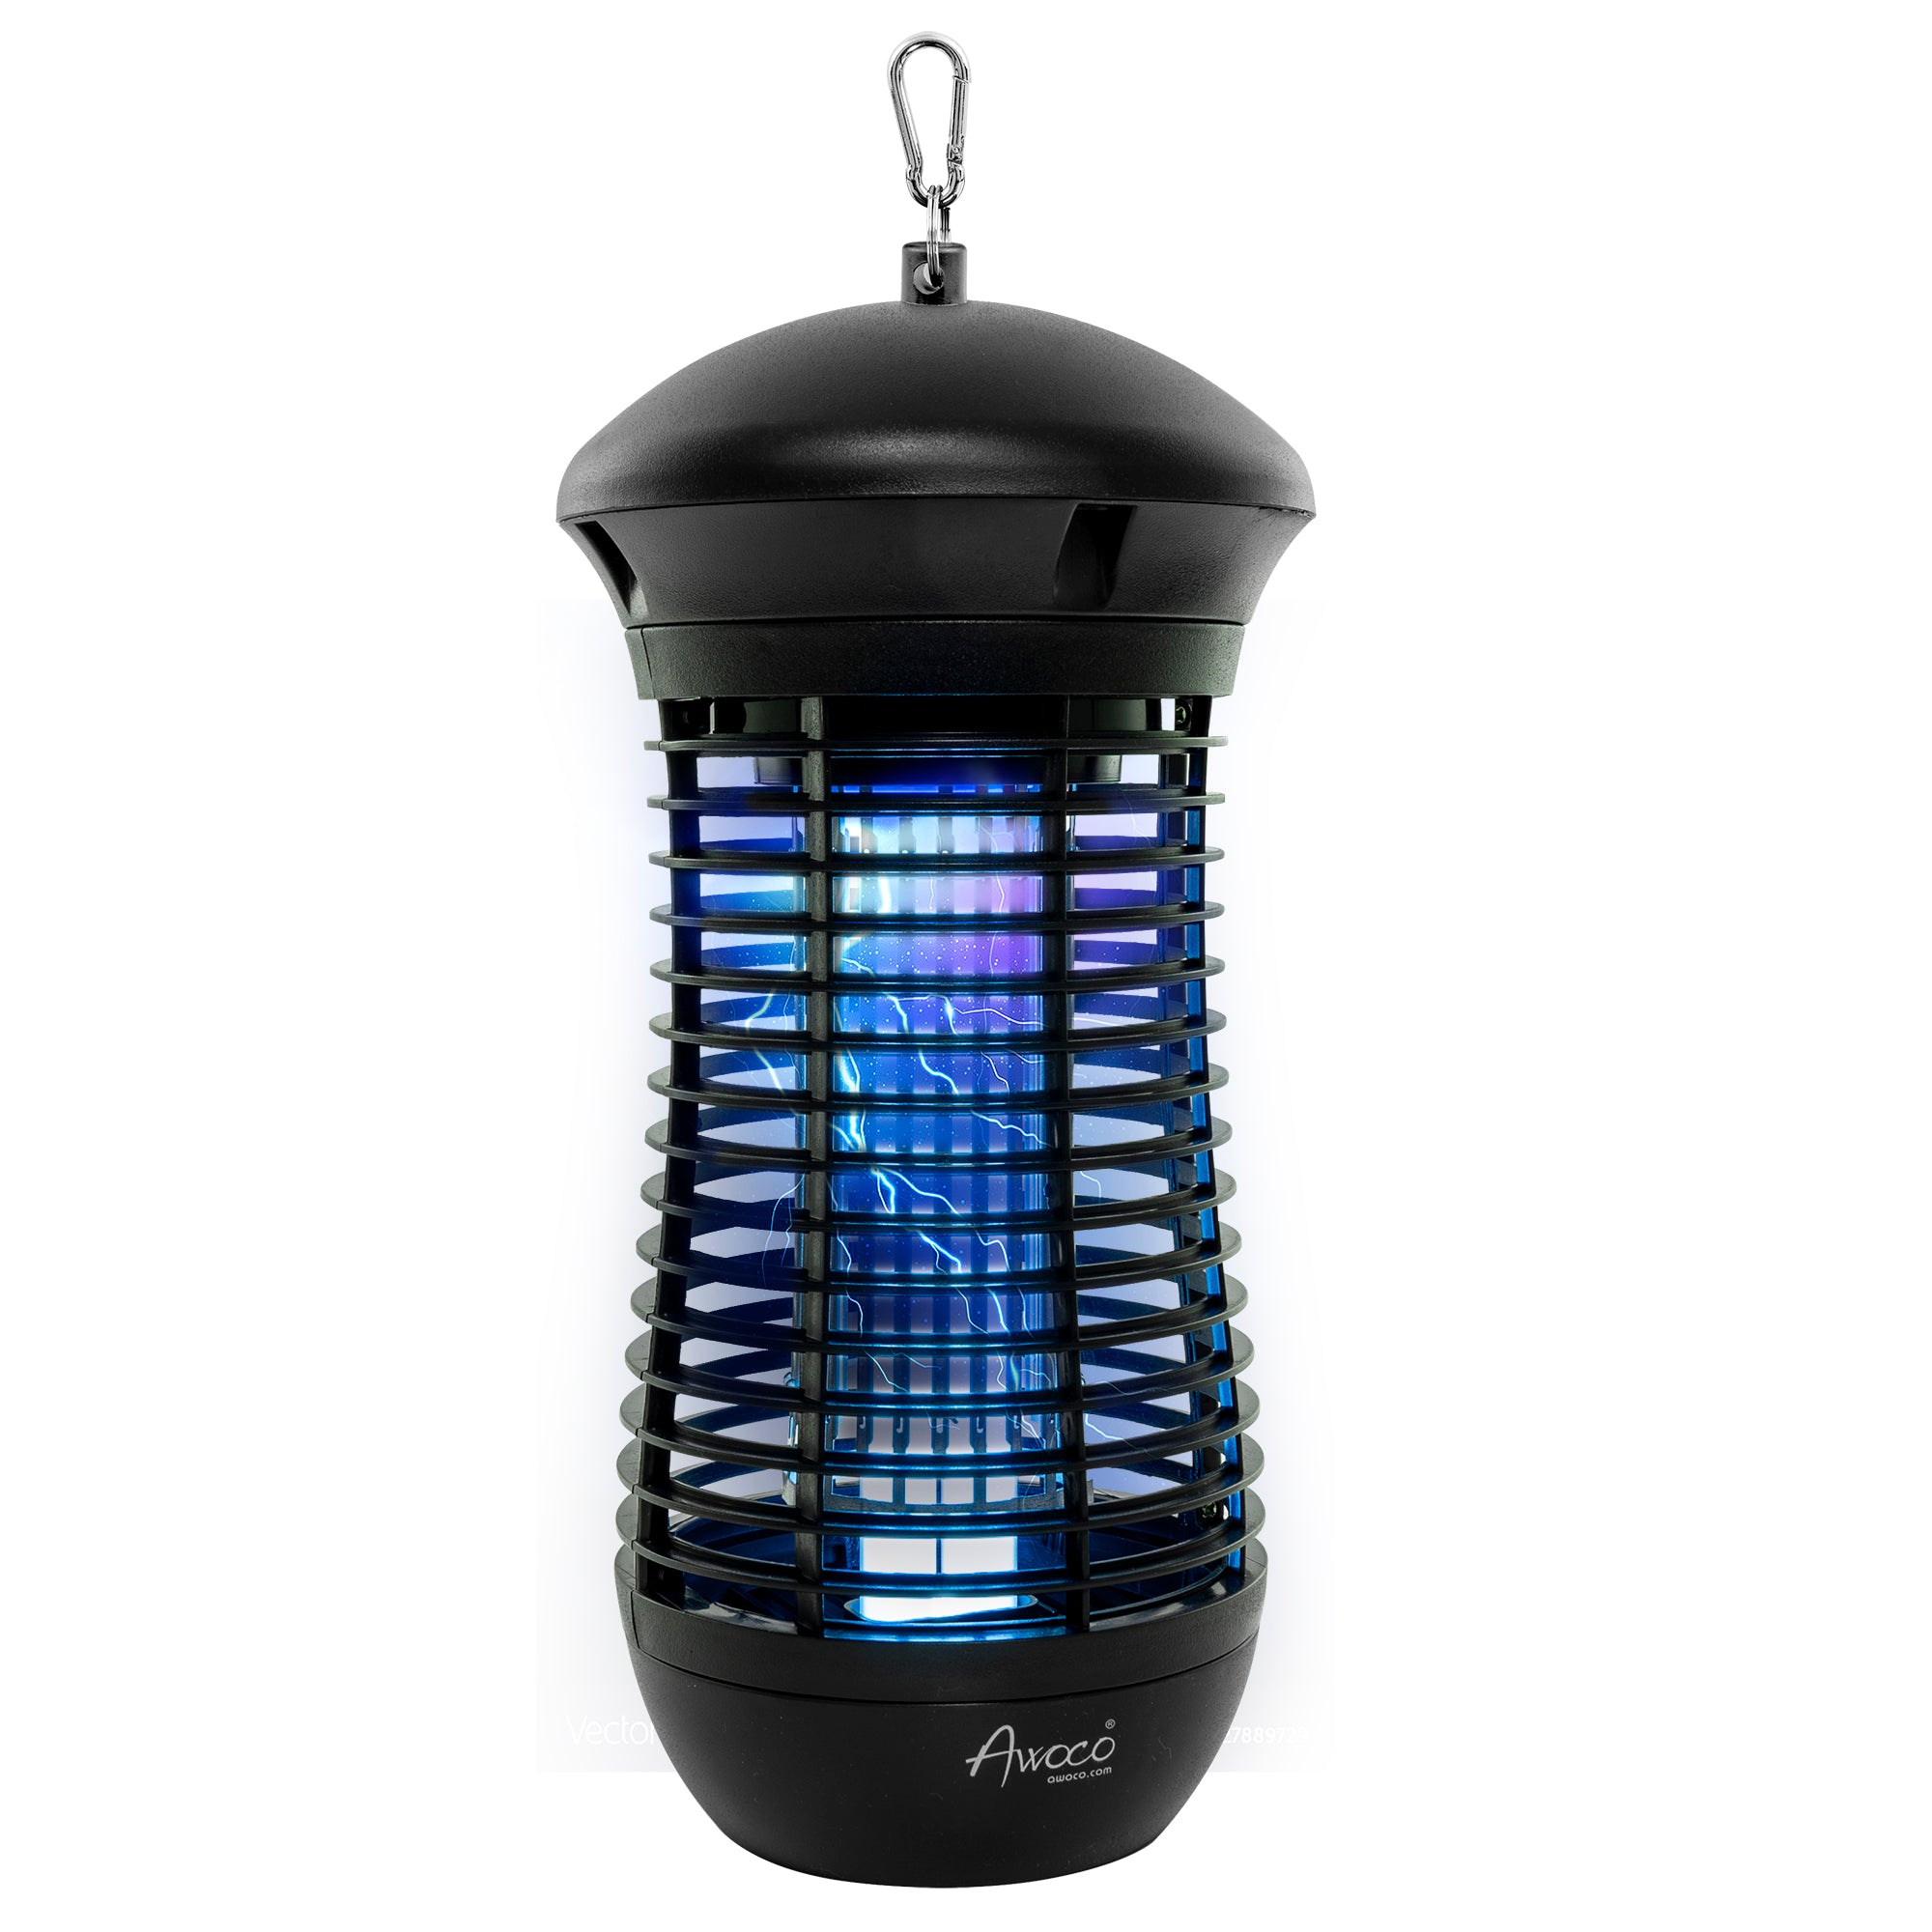 Awoco 18 W Outdoor Bug Zapper 4000V High Powered Electric Killer Fly Trap with 82” Extra Long Power Cord for Eliminating Flying Insects, Flies, Mosquitoes, and Moths